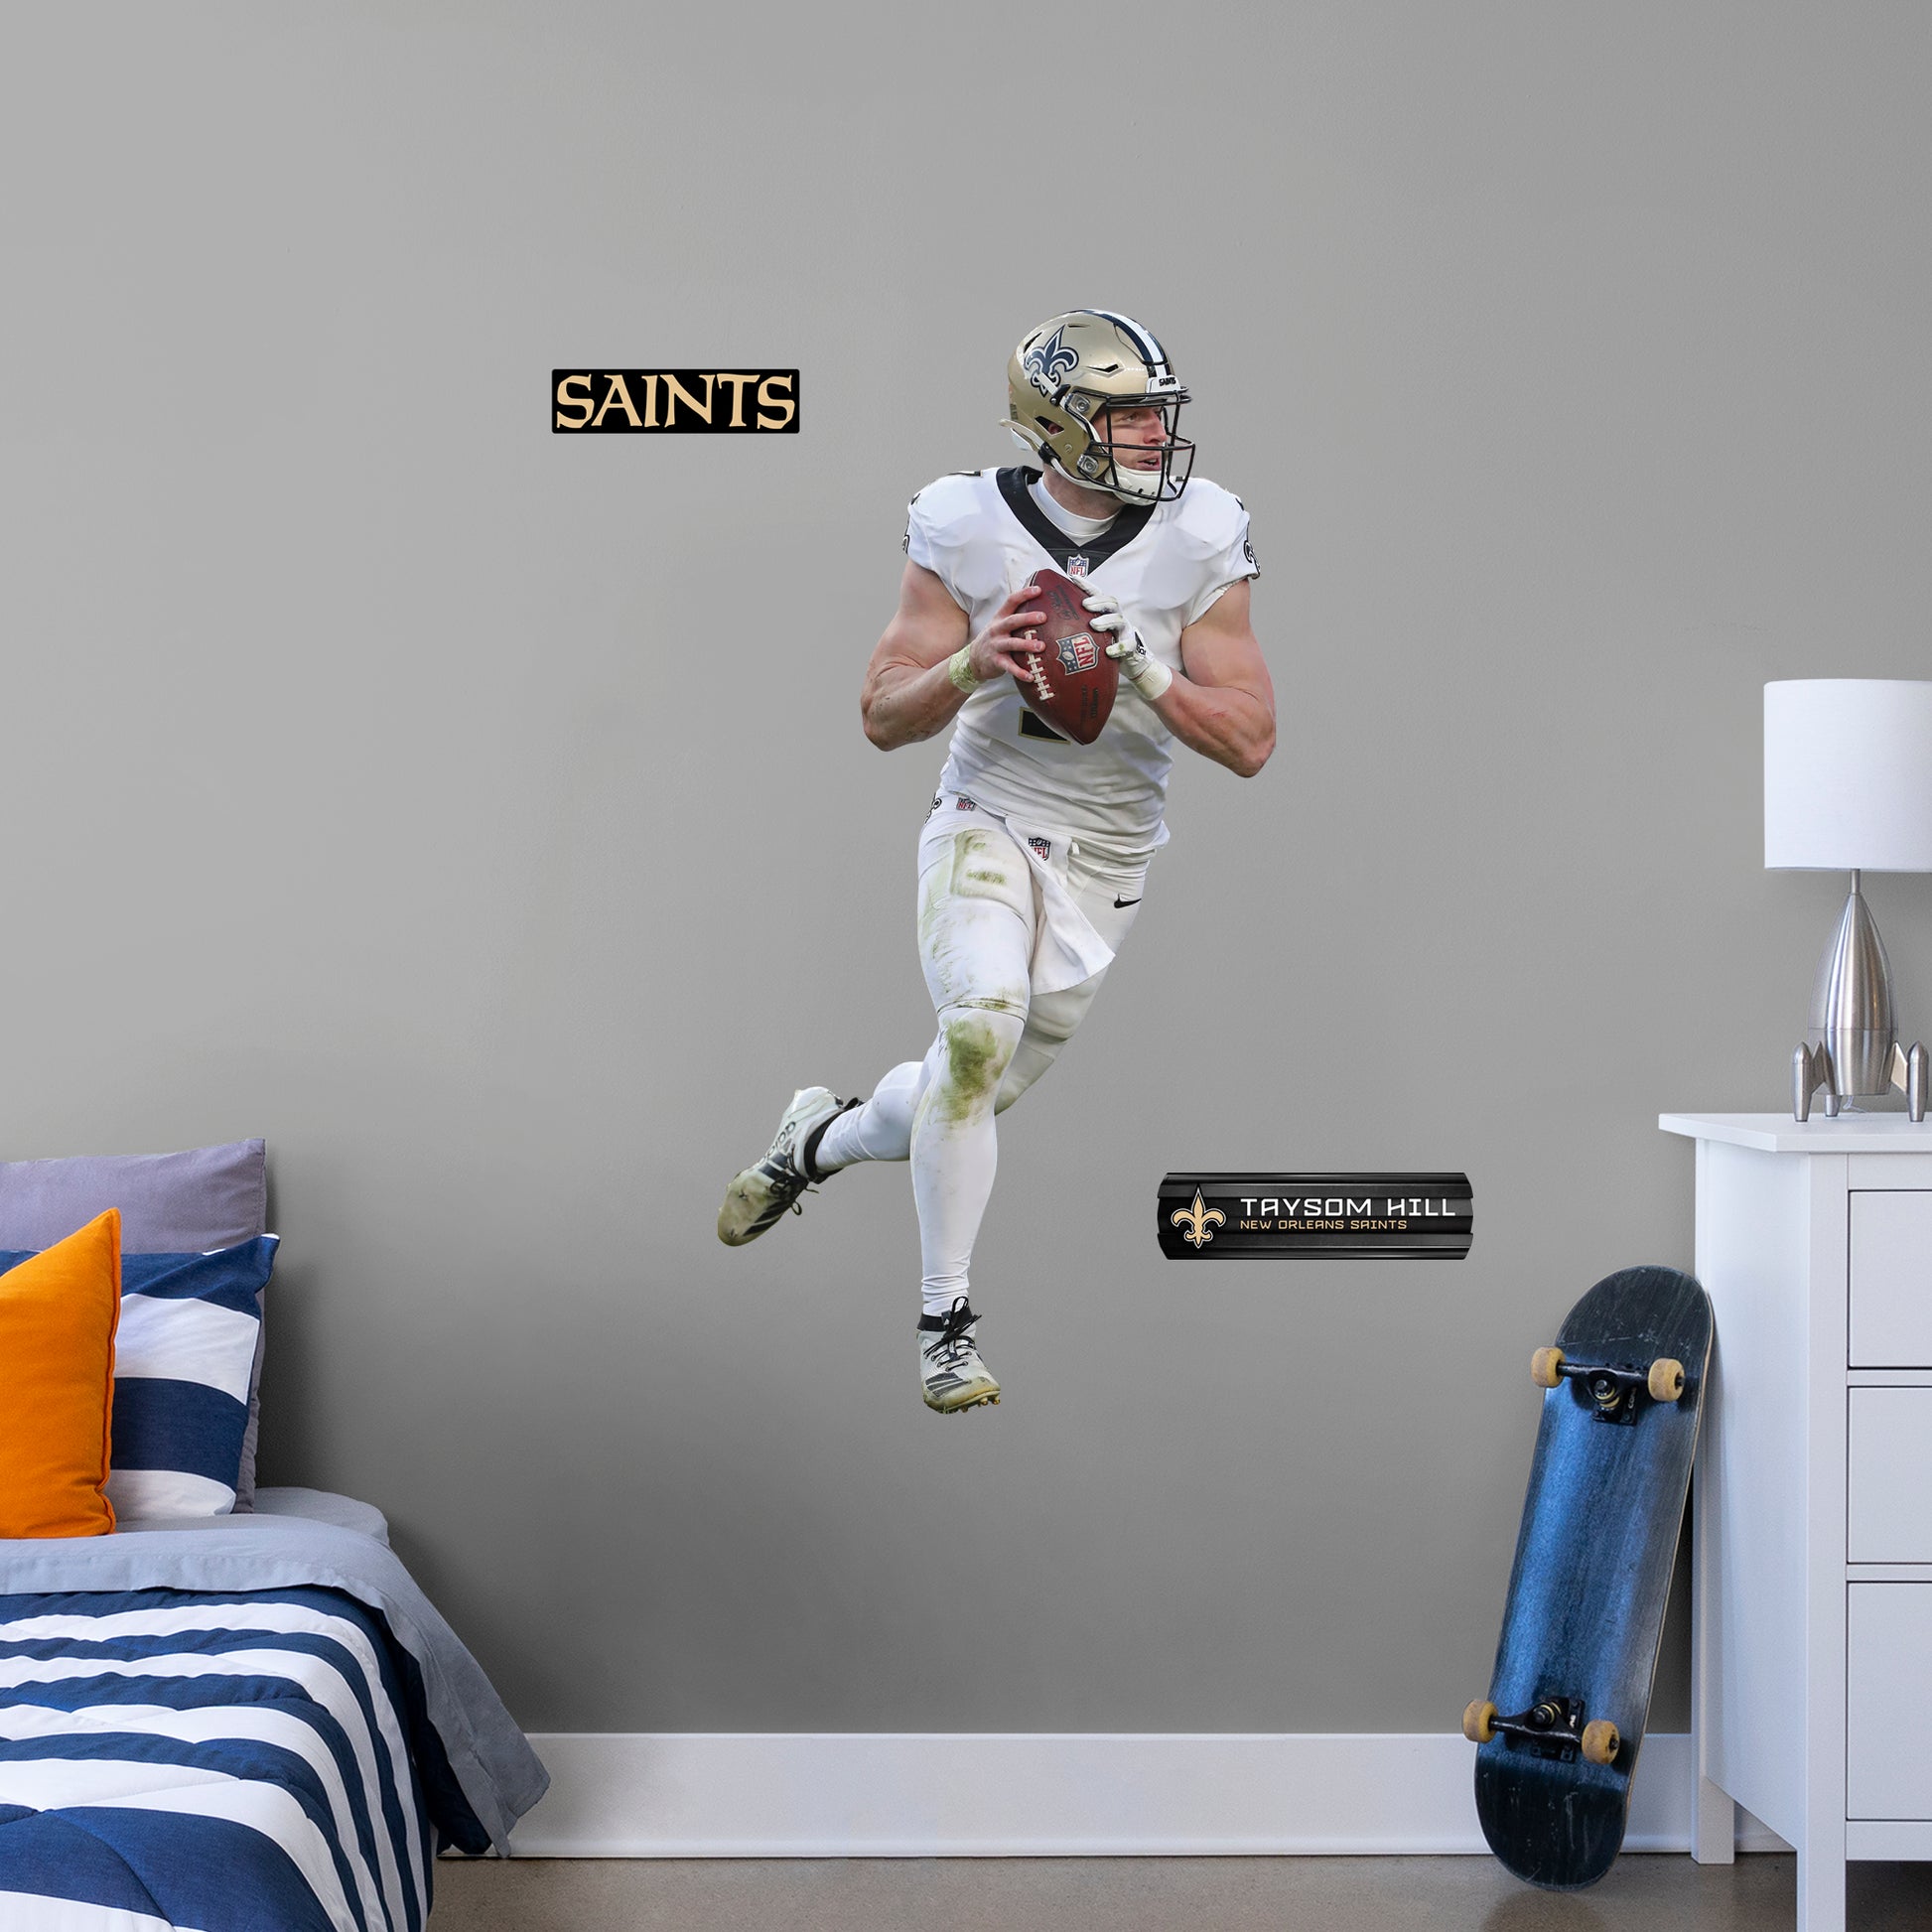 Giant Athlete + 2 Decals (26"W x 51"H) Bring the action of the NFL into your home with a wall decal of Taysom Hill! High quality, durable, and tear resistant, you'll be able to stick and move it as many times as you want to create the ultimate football experience in any room!